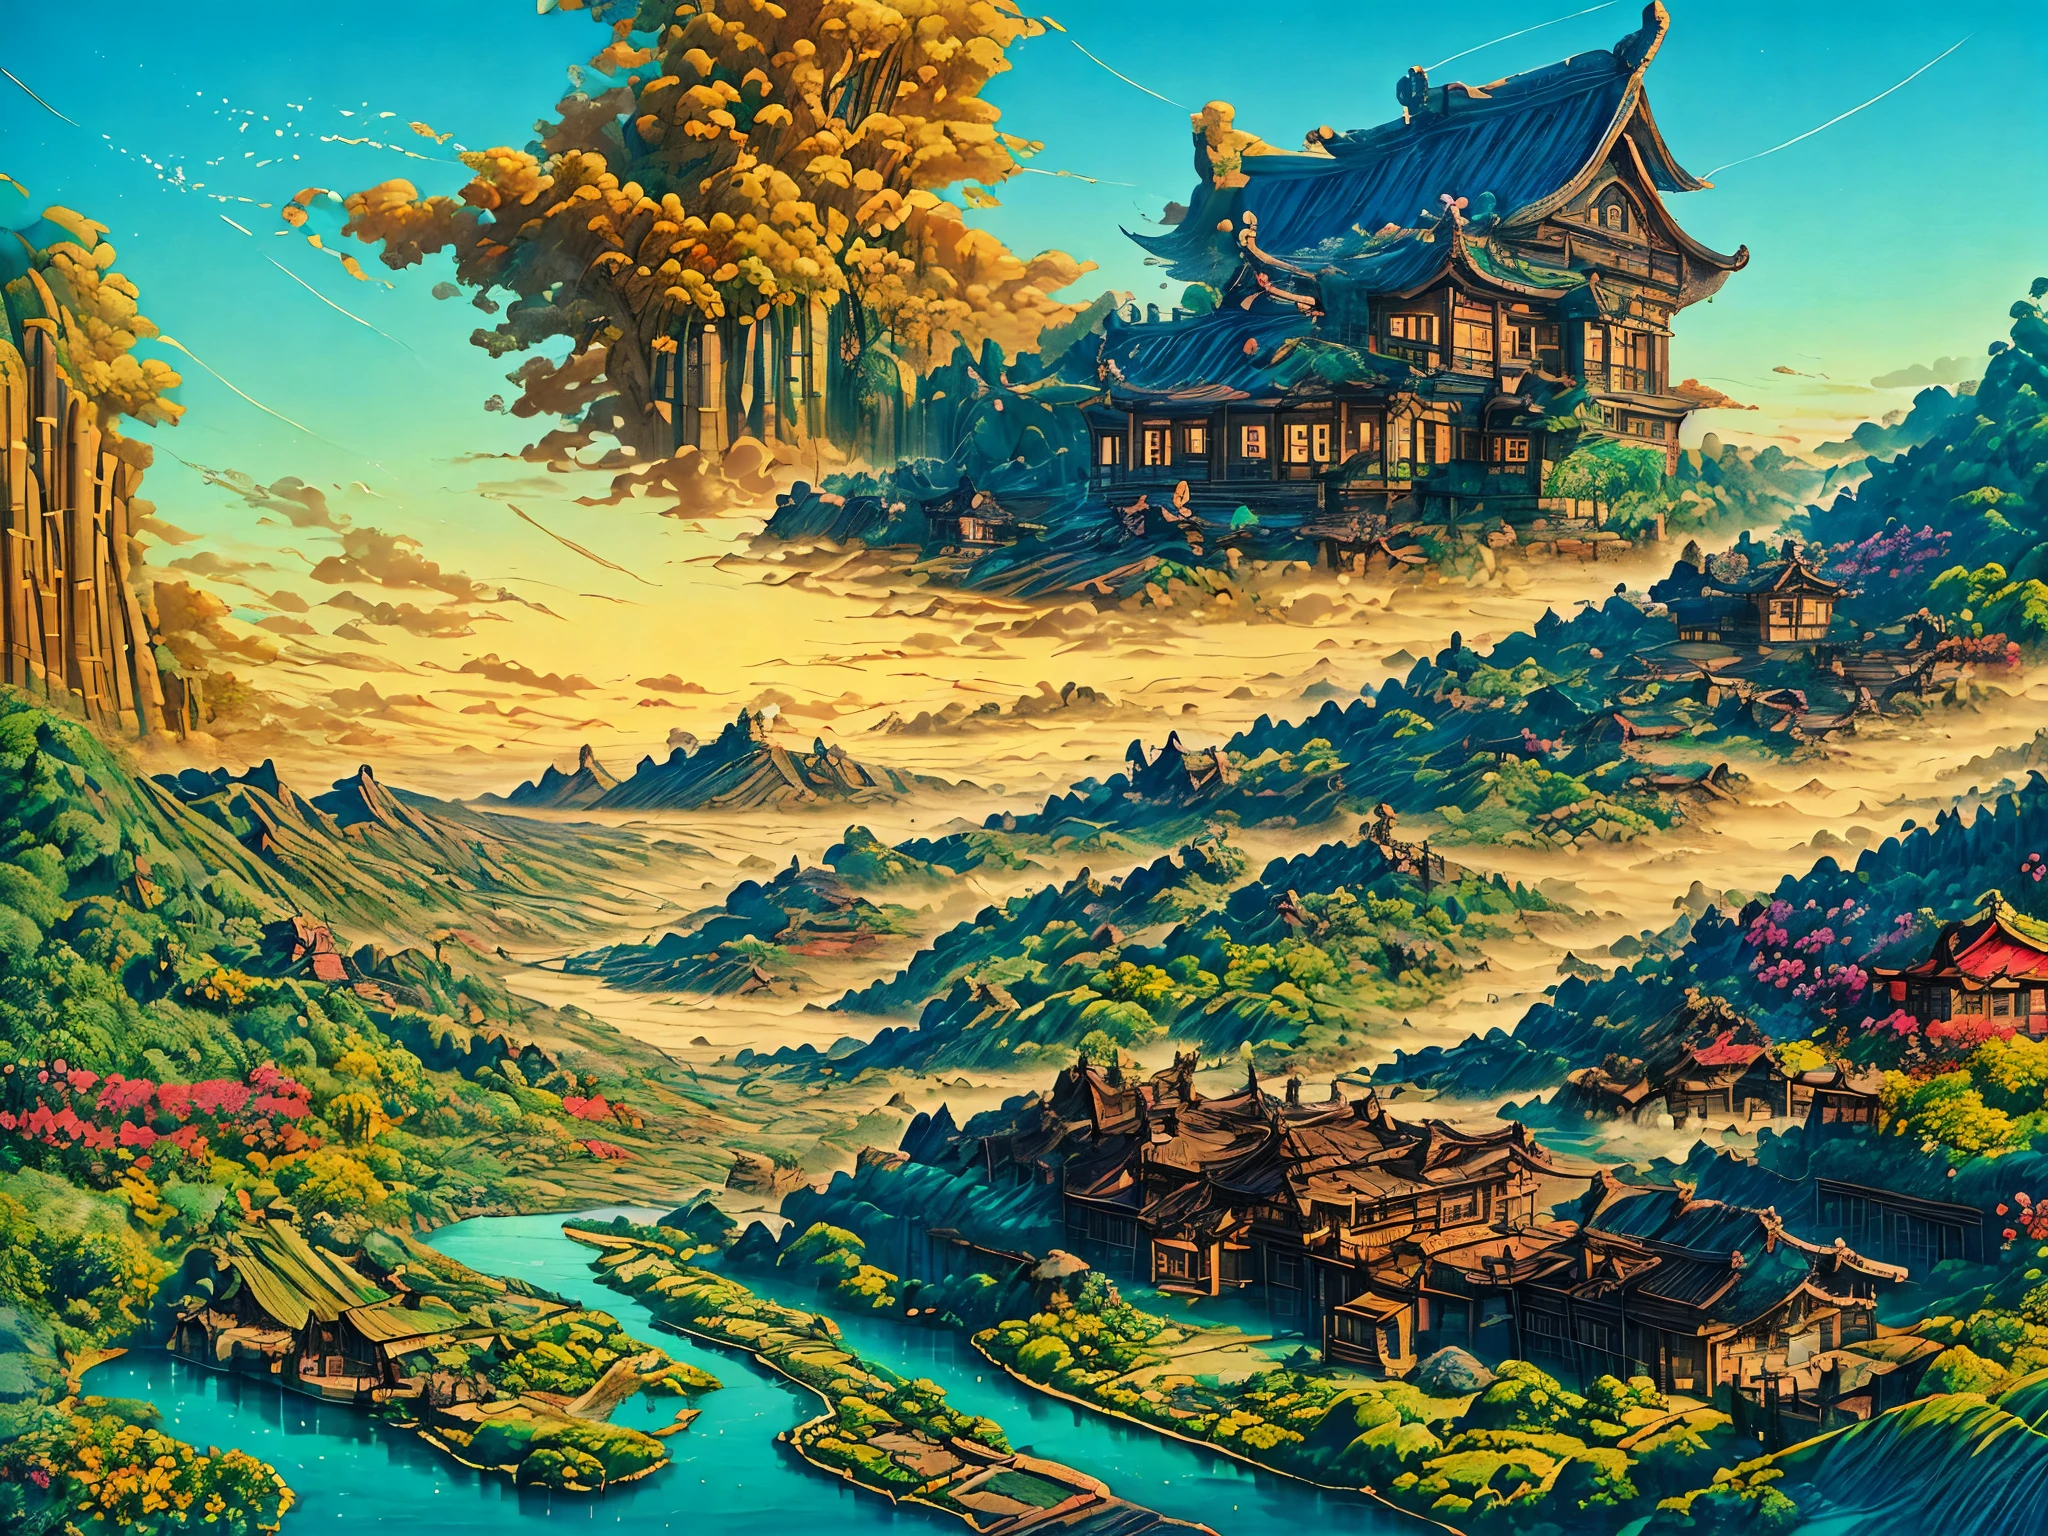 spirit world, Center Theatre Floating Island, maritime, There is a scenic village on the island, The island is surrounded by waterfalls., The waterfall flows from the island into the sea, The nine-story pagoda in the center of the island, Village top